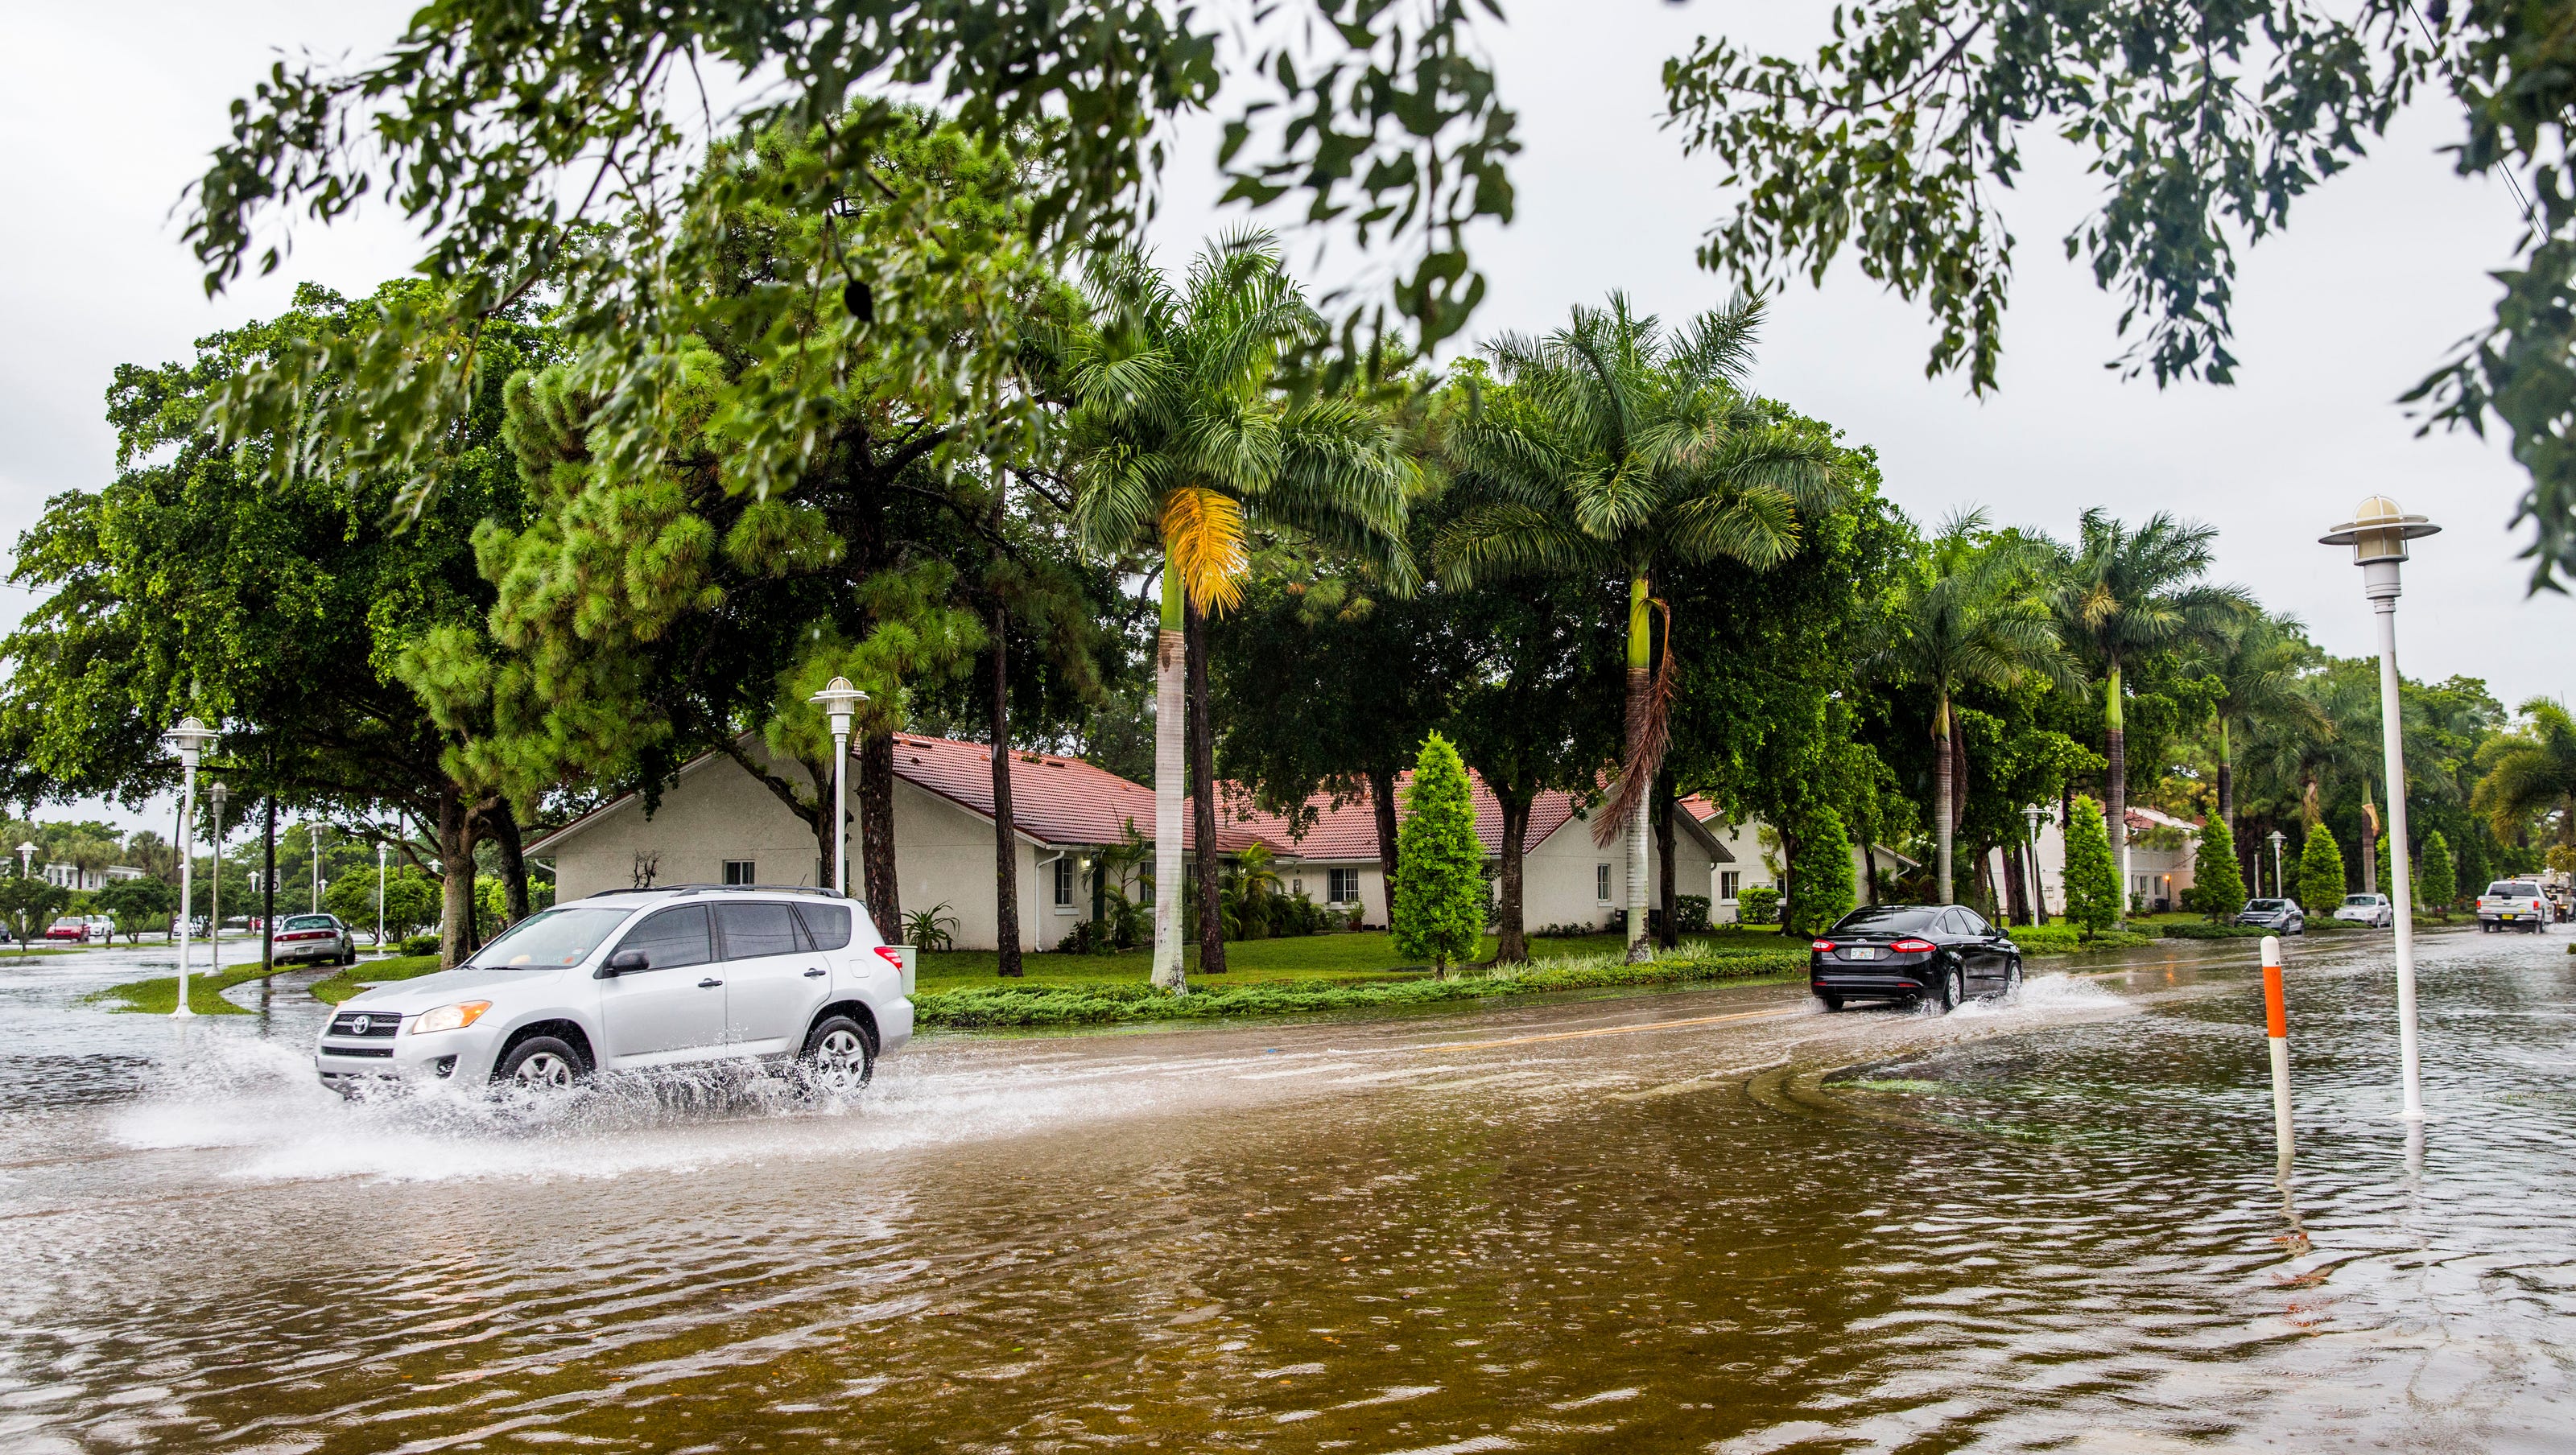 Agency awards Naples $75K to continue climate change resiliency efforts - Naples Daily News